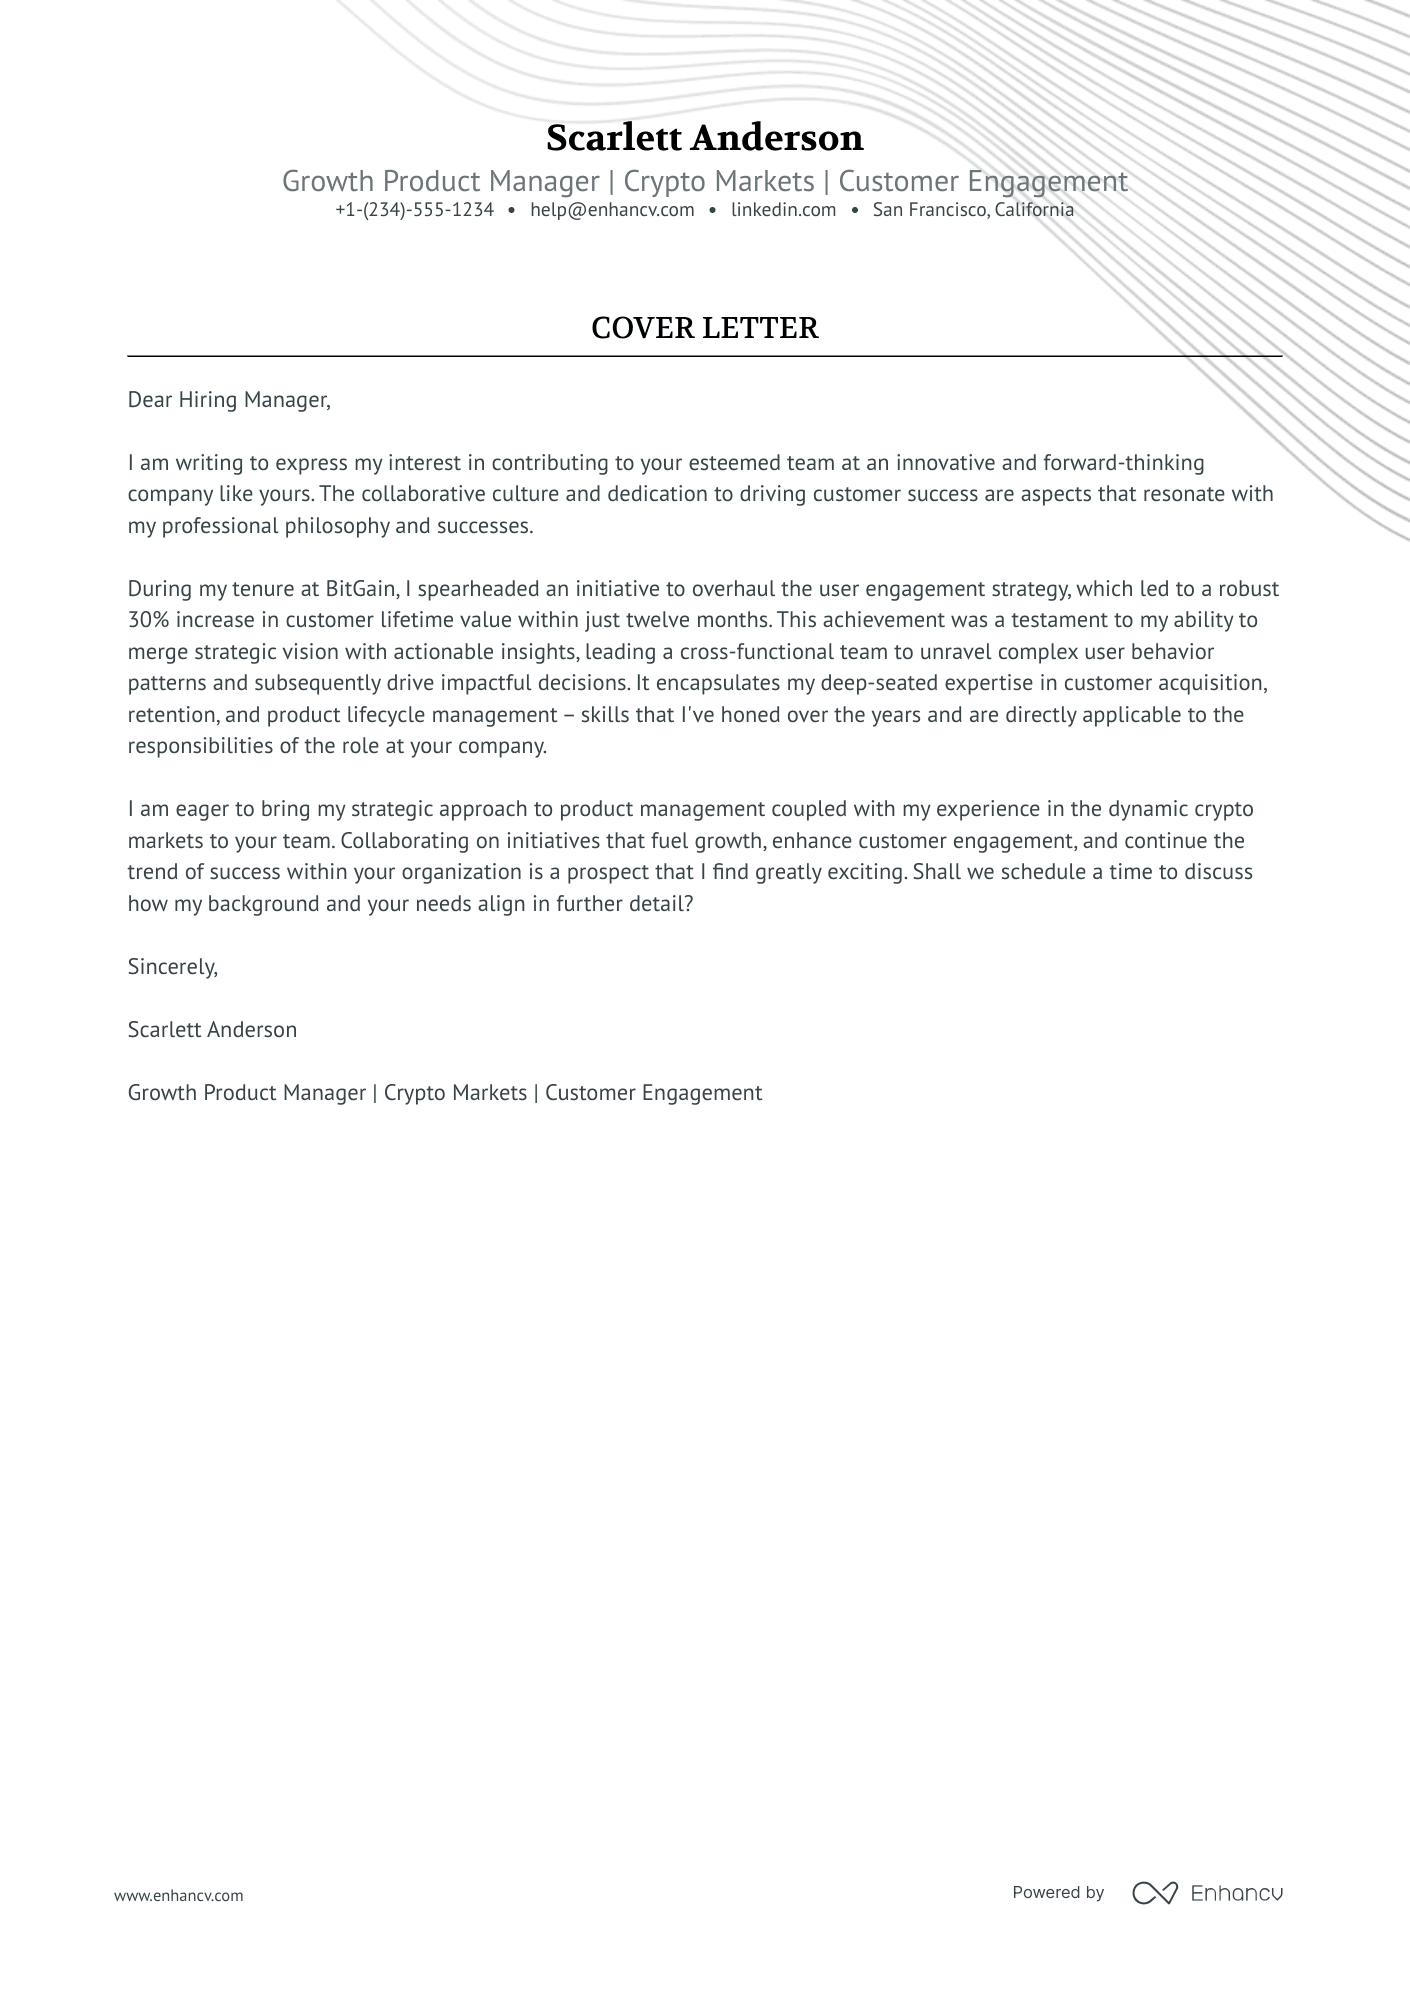 cover letter of a product